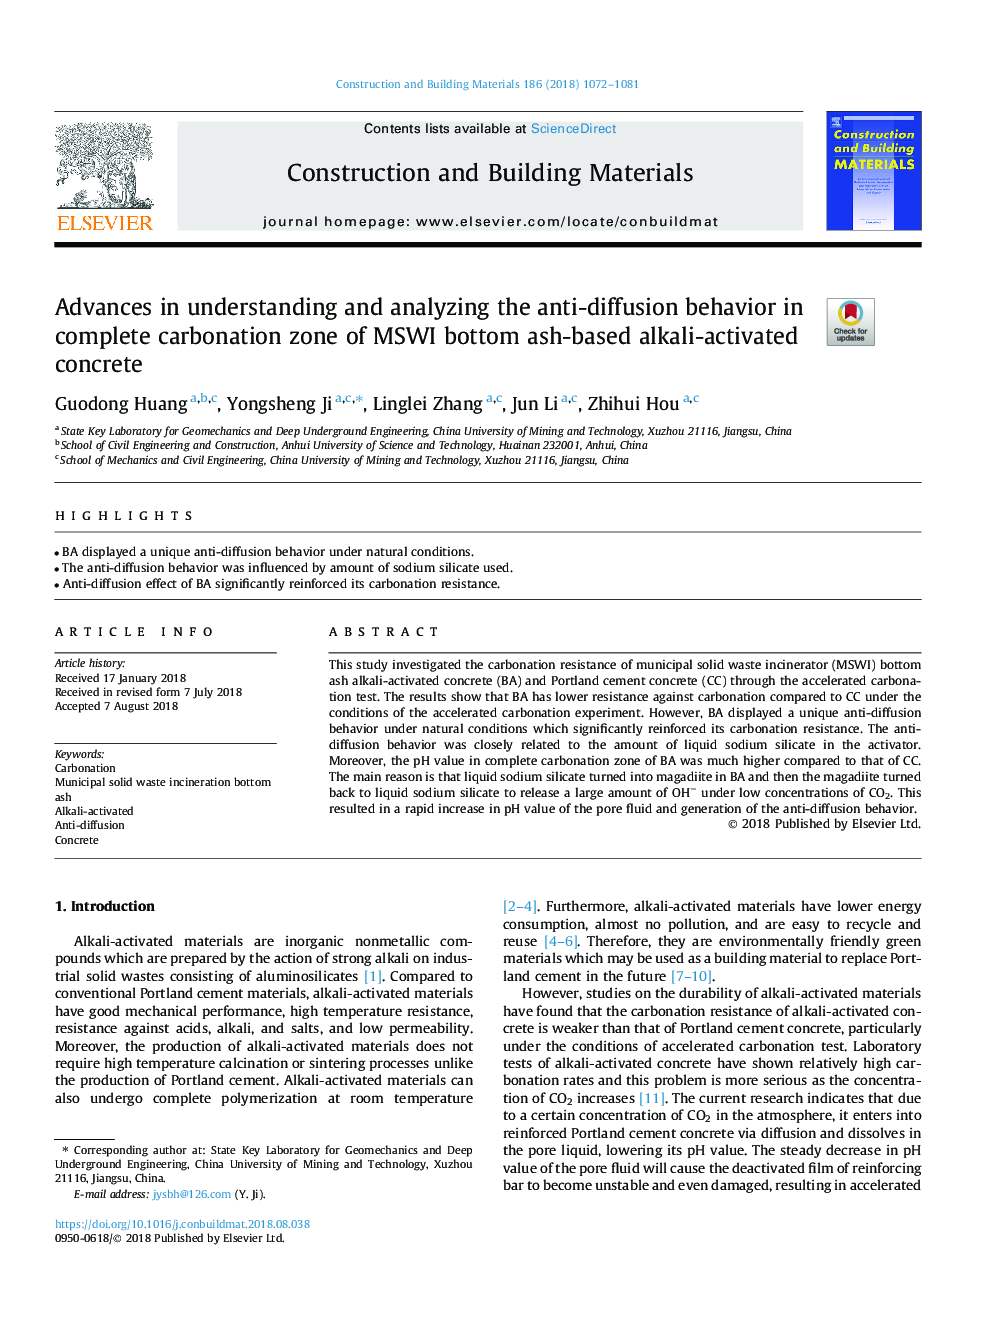 Advances in understanding and analyzing the anti-diffusion behavior in complete carbonation zone of MSWI bottom ash-based alkali-activated concrete